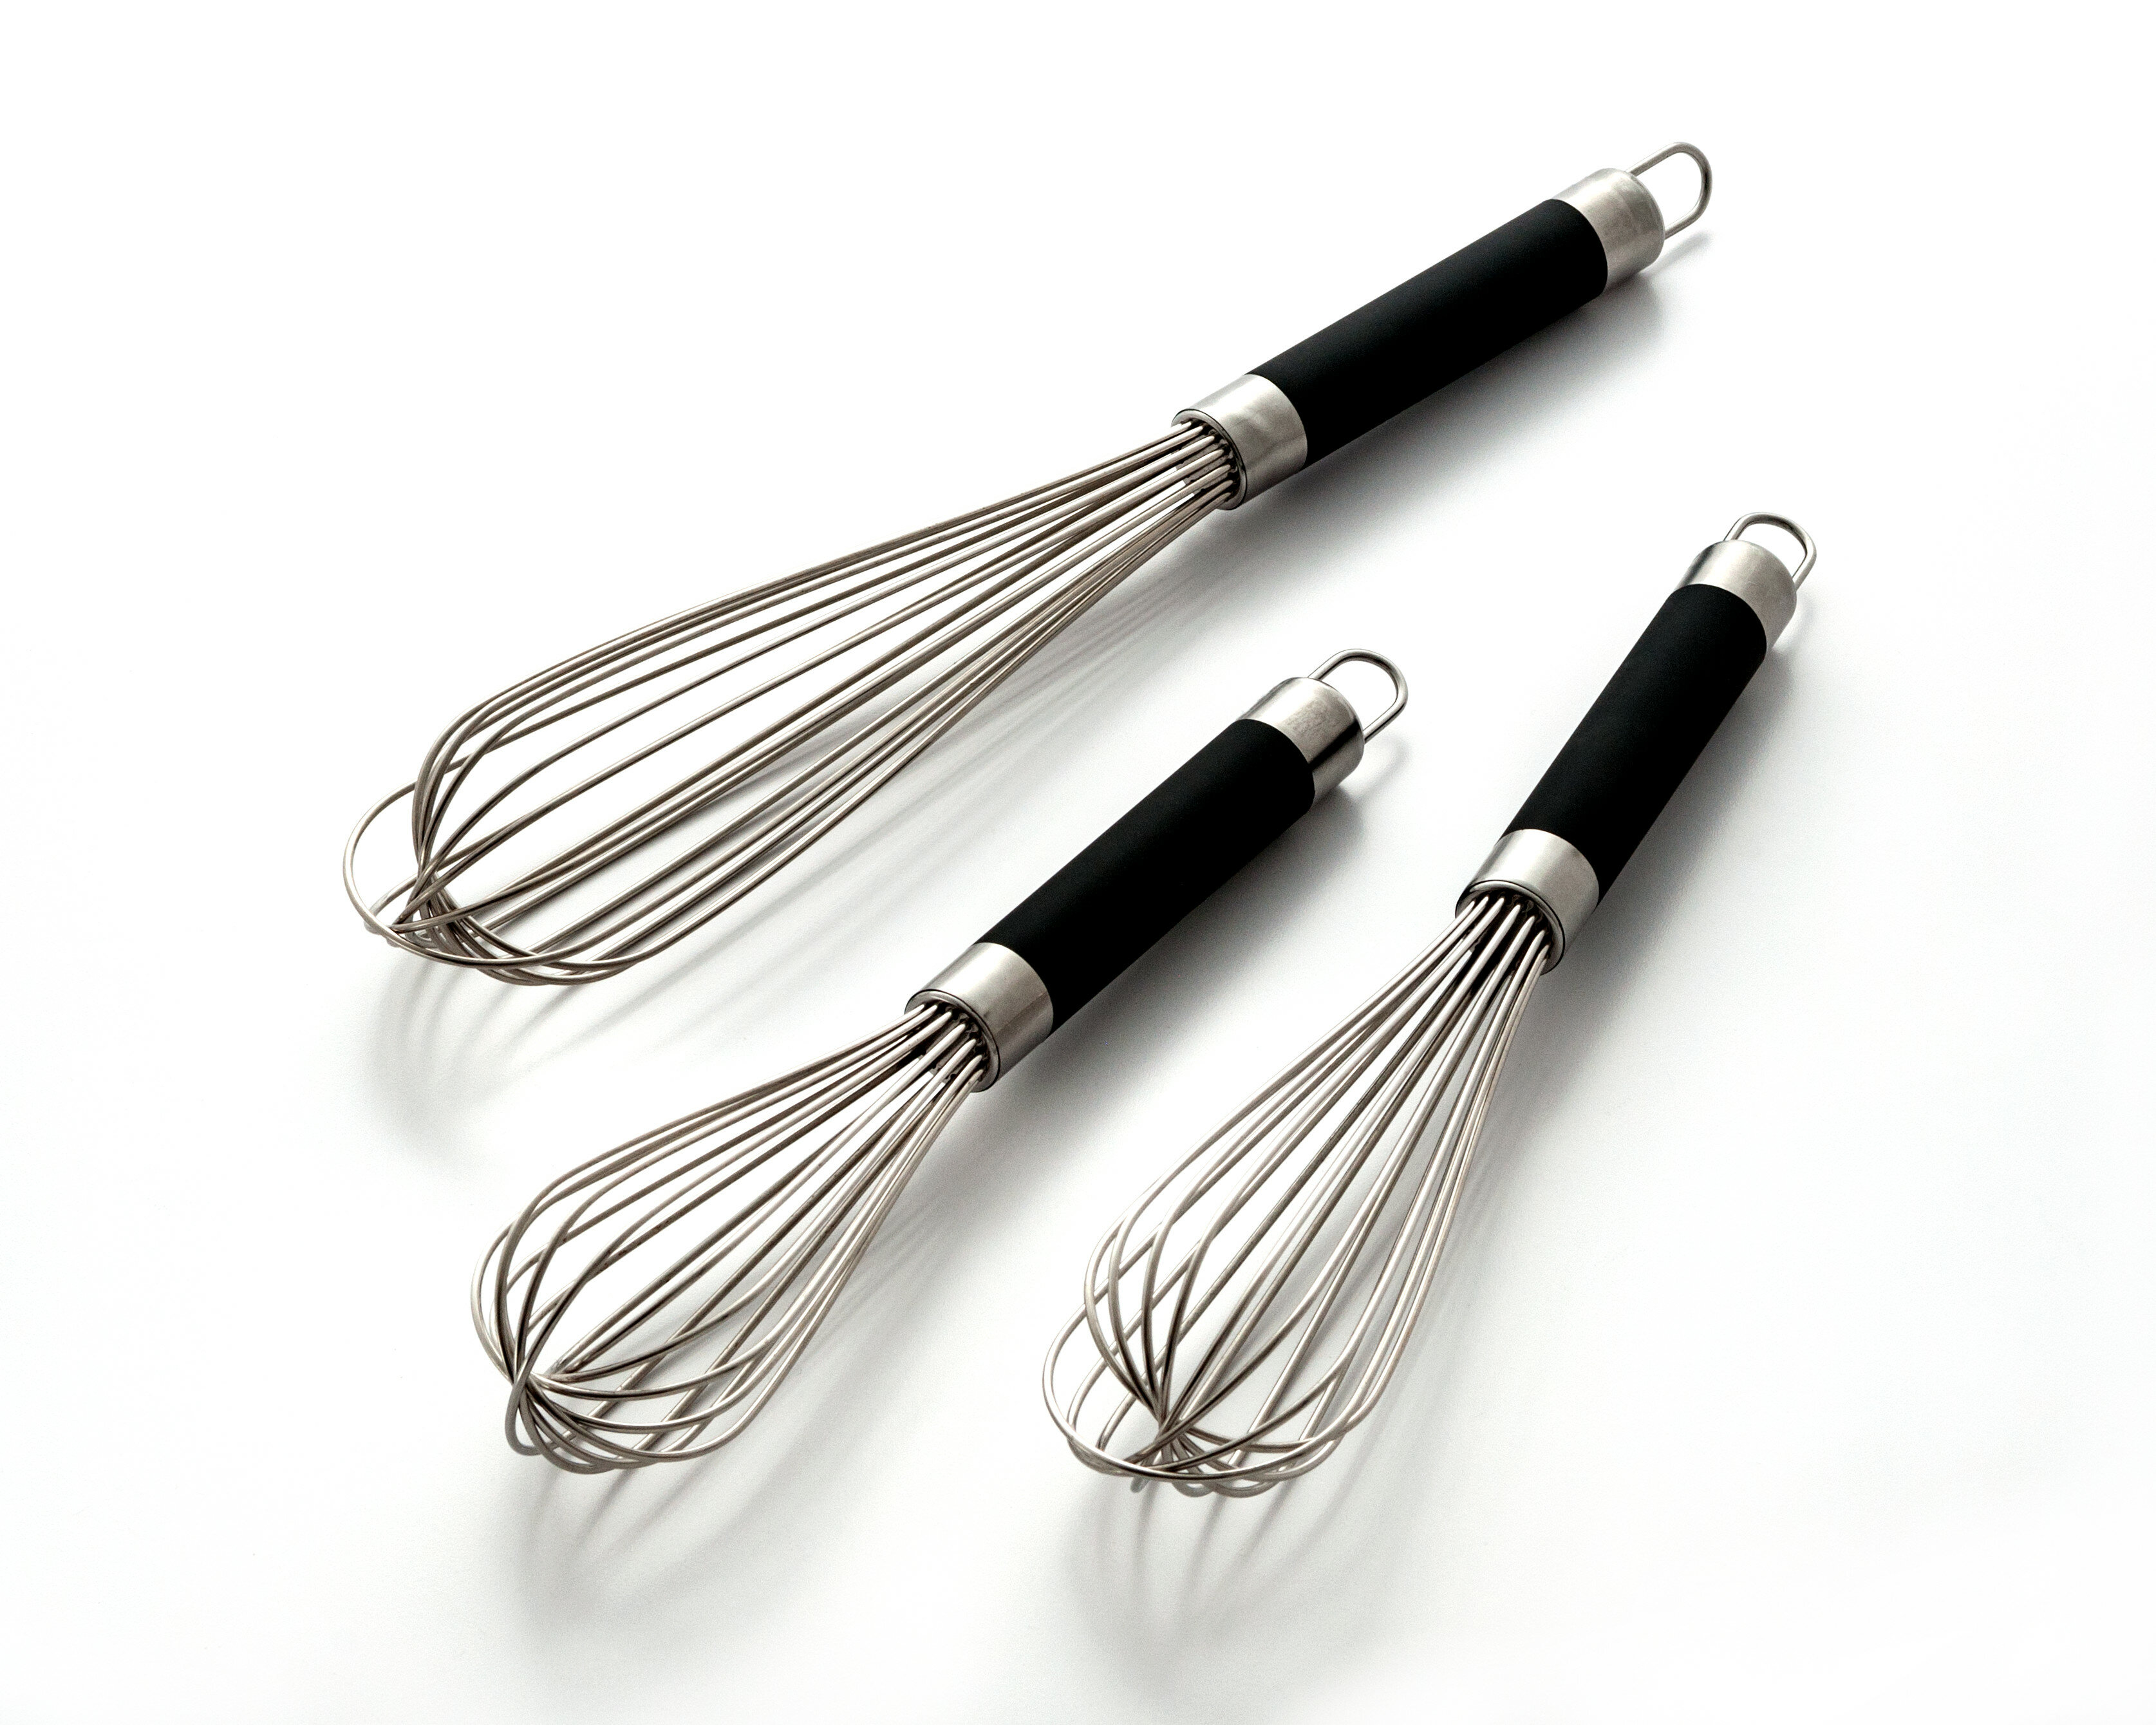 Cook Pro 229 Heavy Duty, Sturdy Kitchenware Perfect for Mixing, Baking Stainless Steel French Whisk, 14, Rose Gold